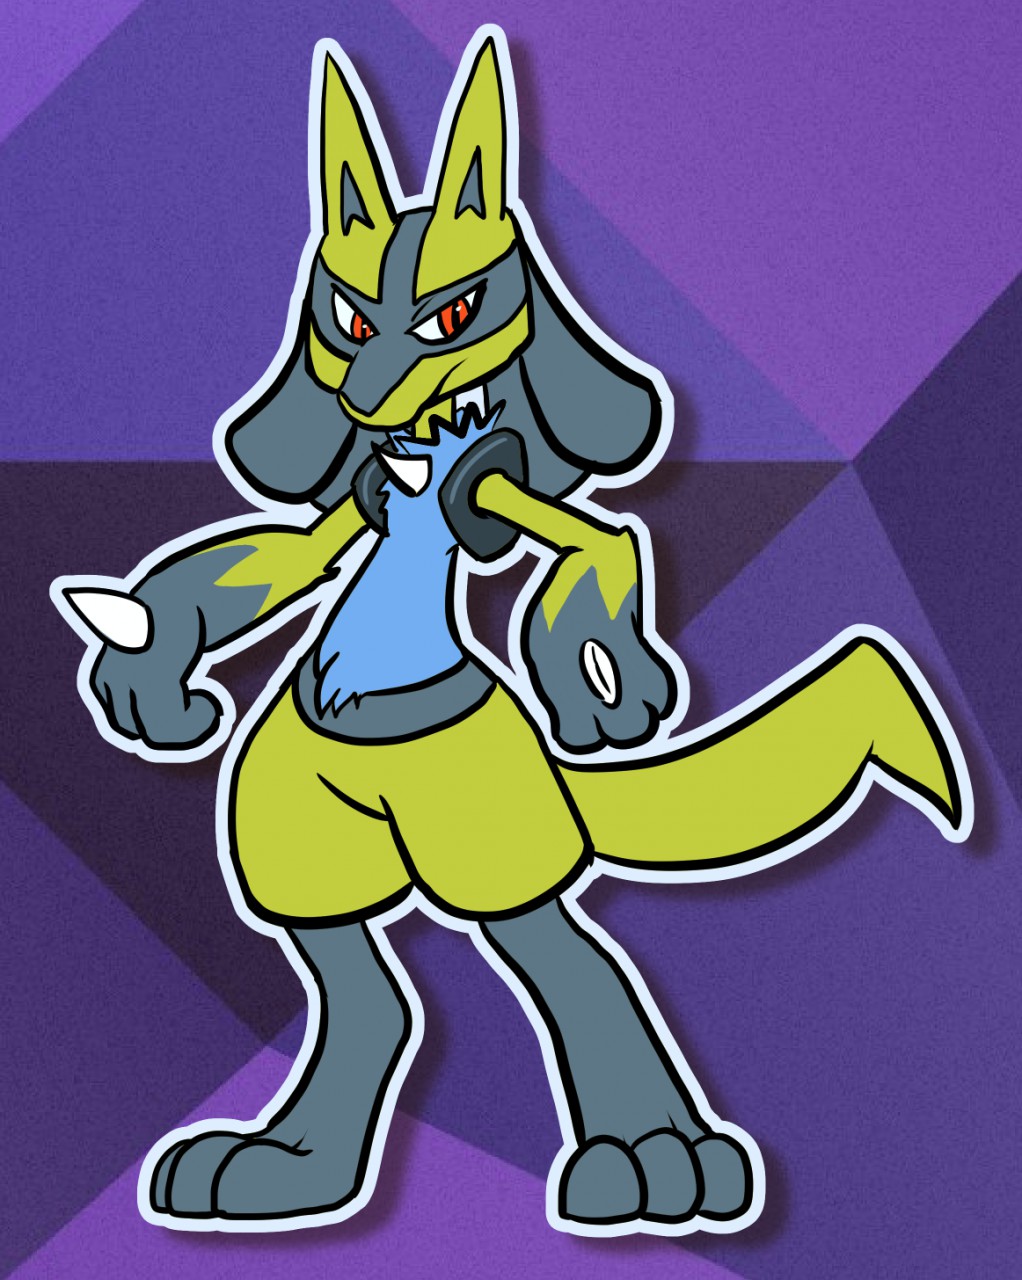 Shiny Lucario Global Link Art by TrainerParshen on DeviantArt